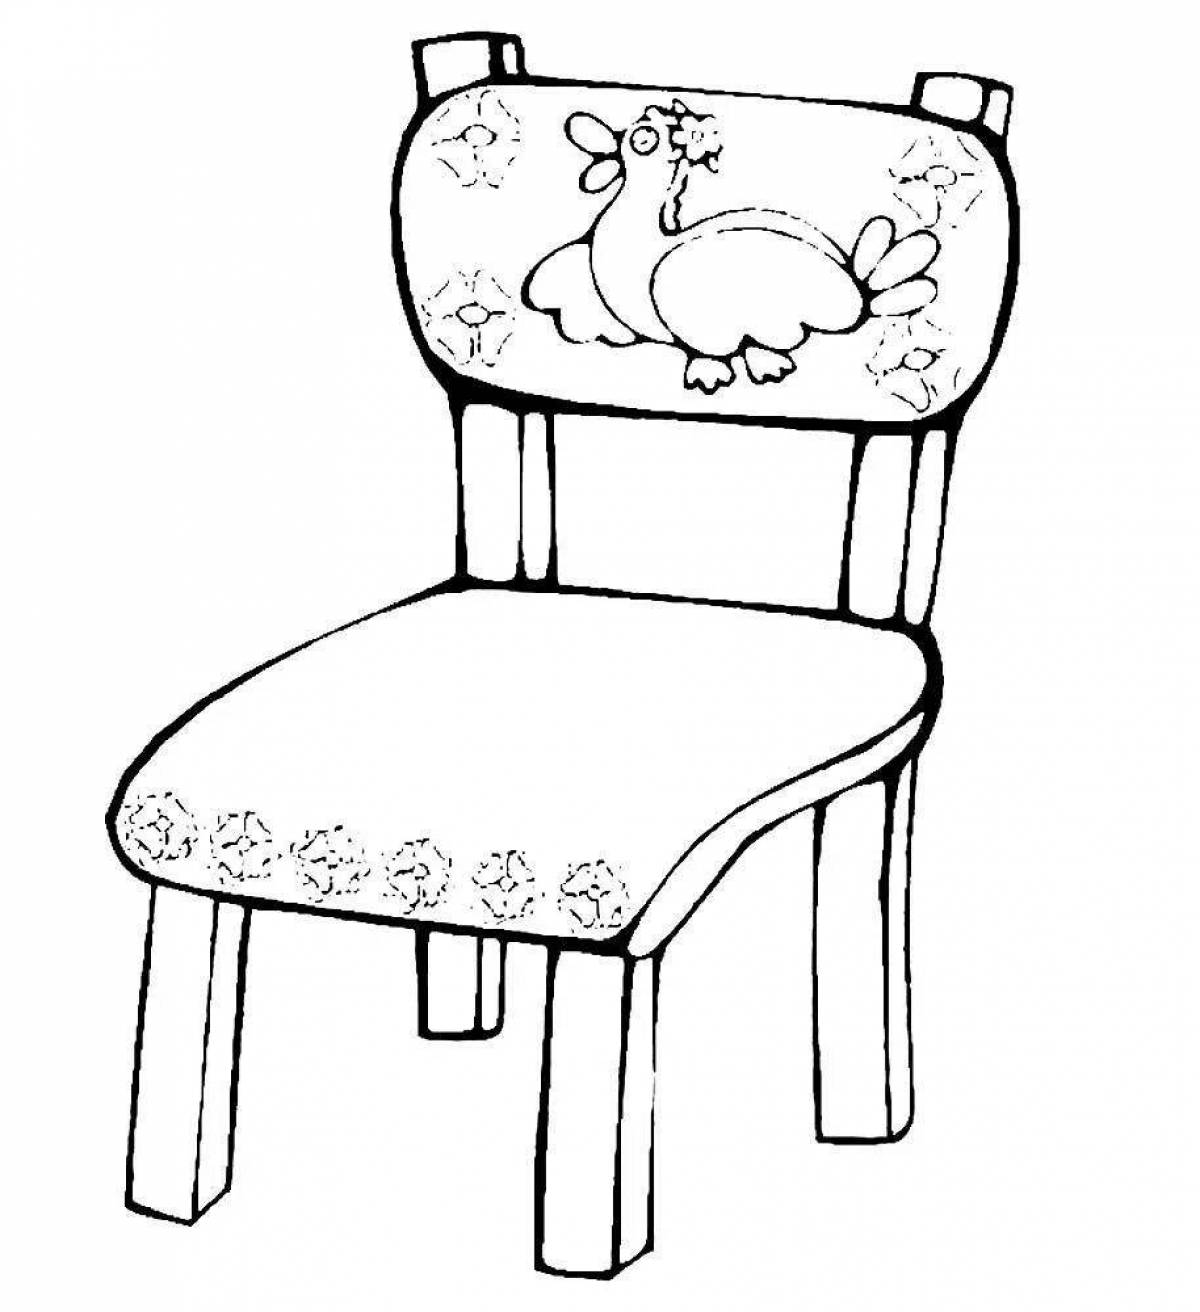 Coloring page happy high chair